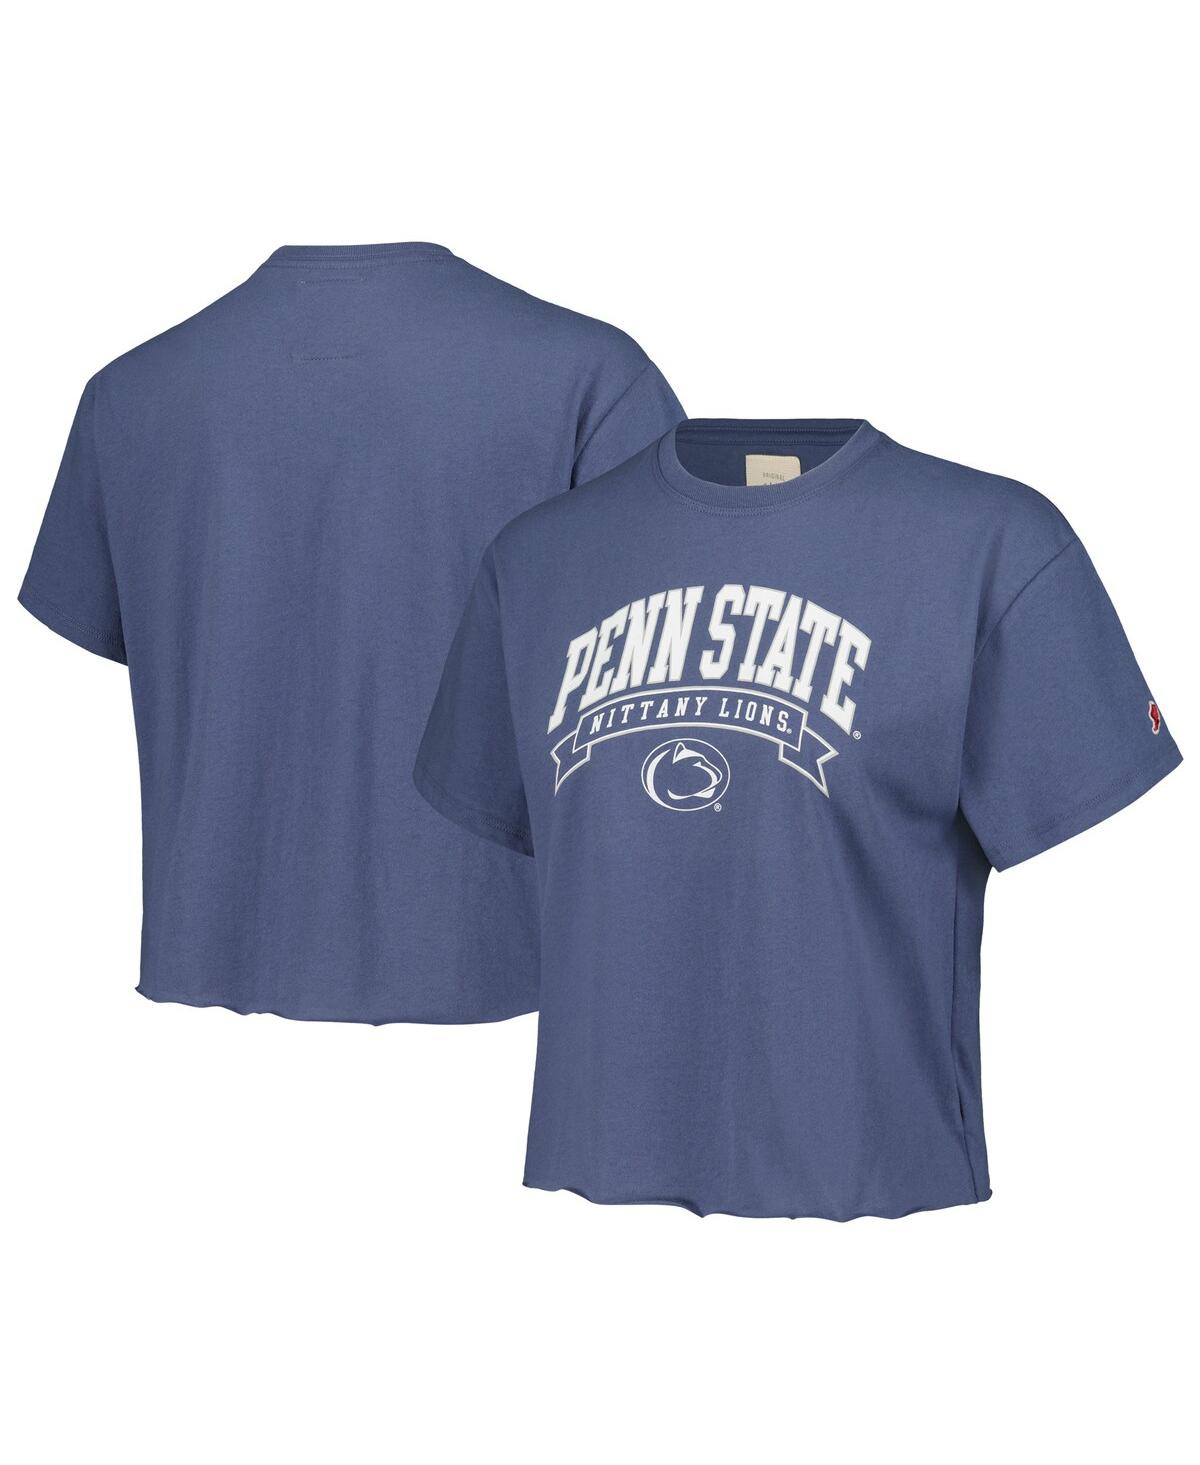 Women's League Collegiate Wear Navy Penn State Nittany Lions Banner Clothesline Cropped T-shirt - Navy